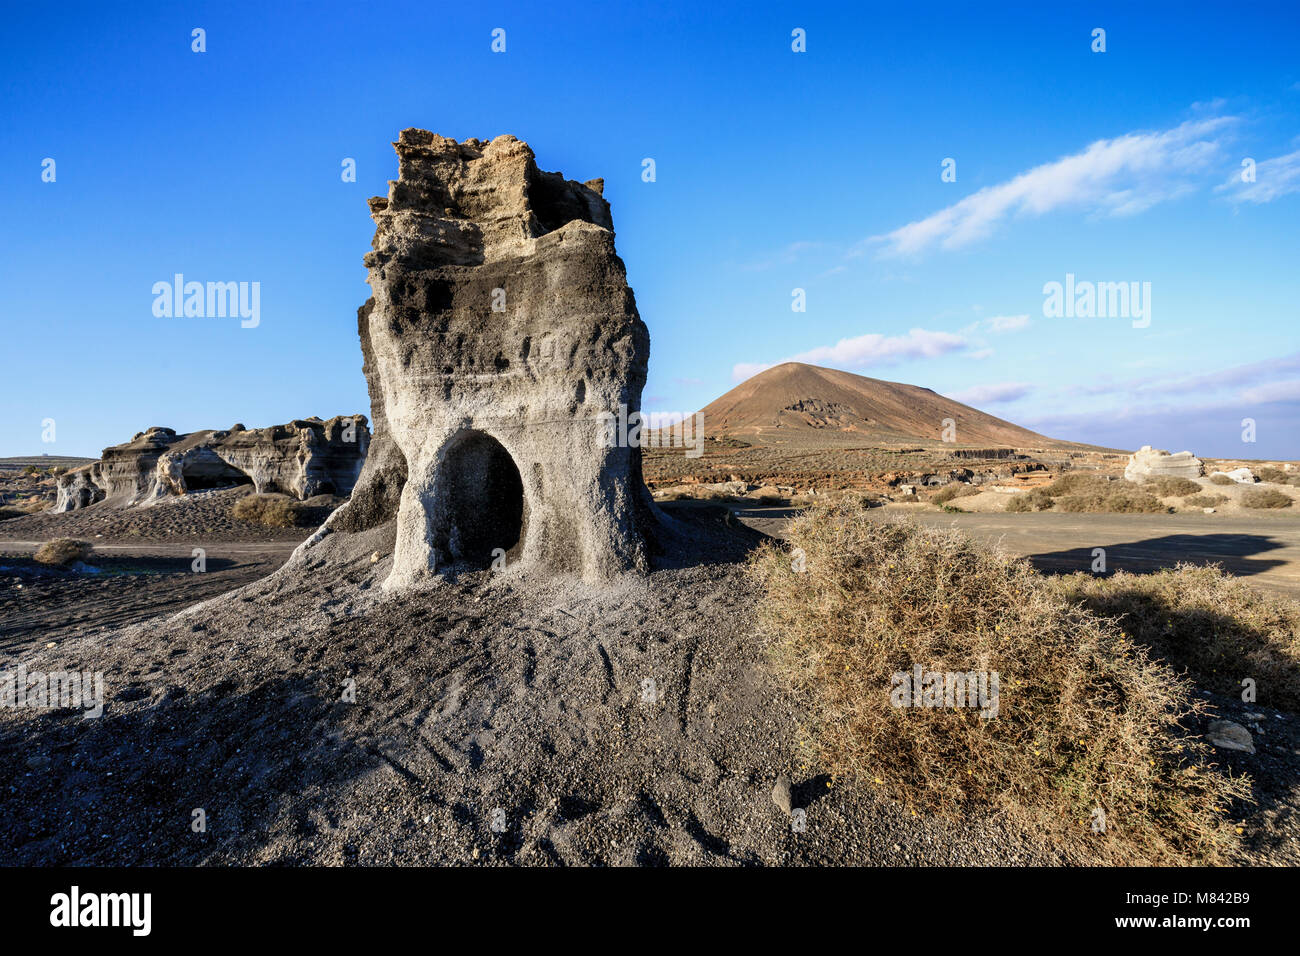 Volcanic rock formations near Teseguite, Lanzarote, Canary Islands, Spain Stock Photo